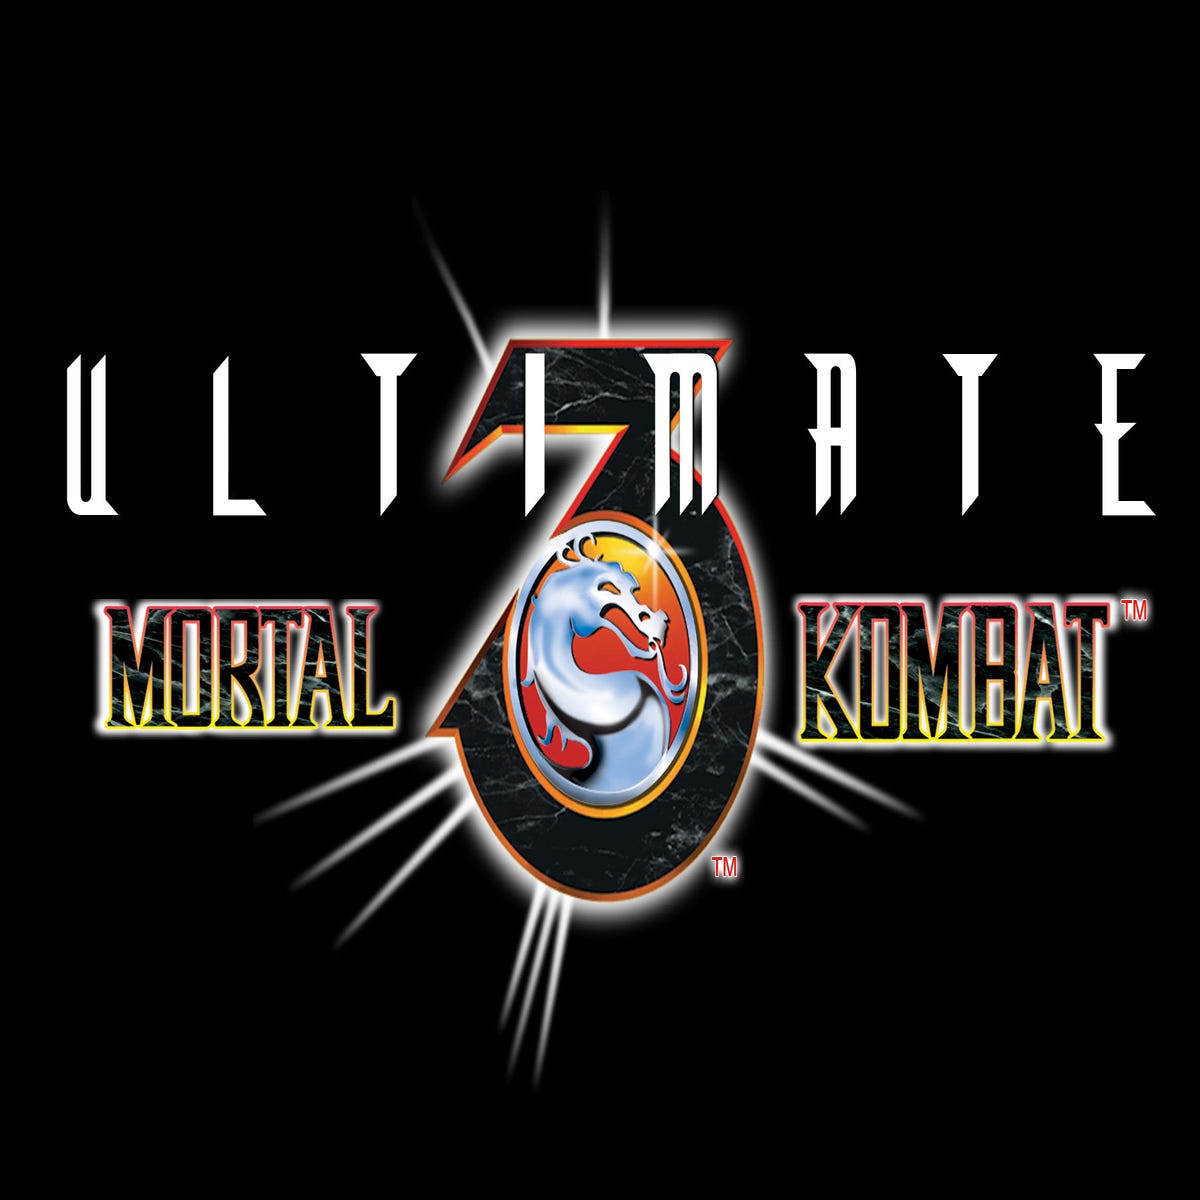 Ultimate Mortal Kombat 3 iPhone/iTouch Review -  